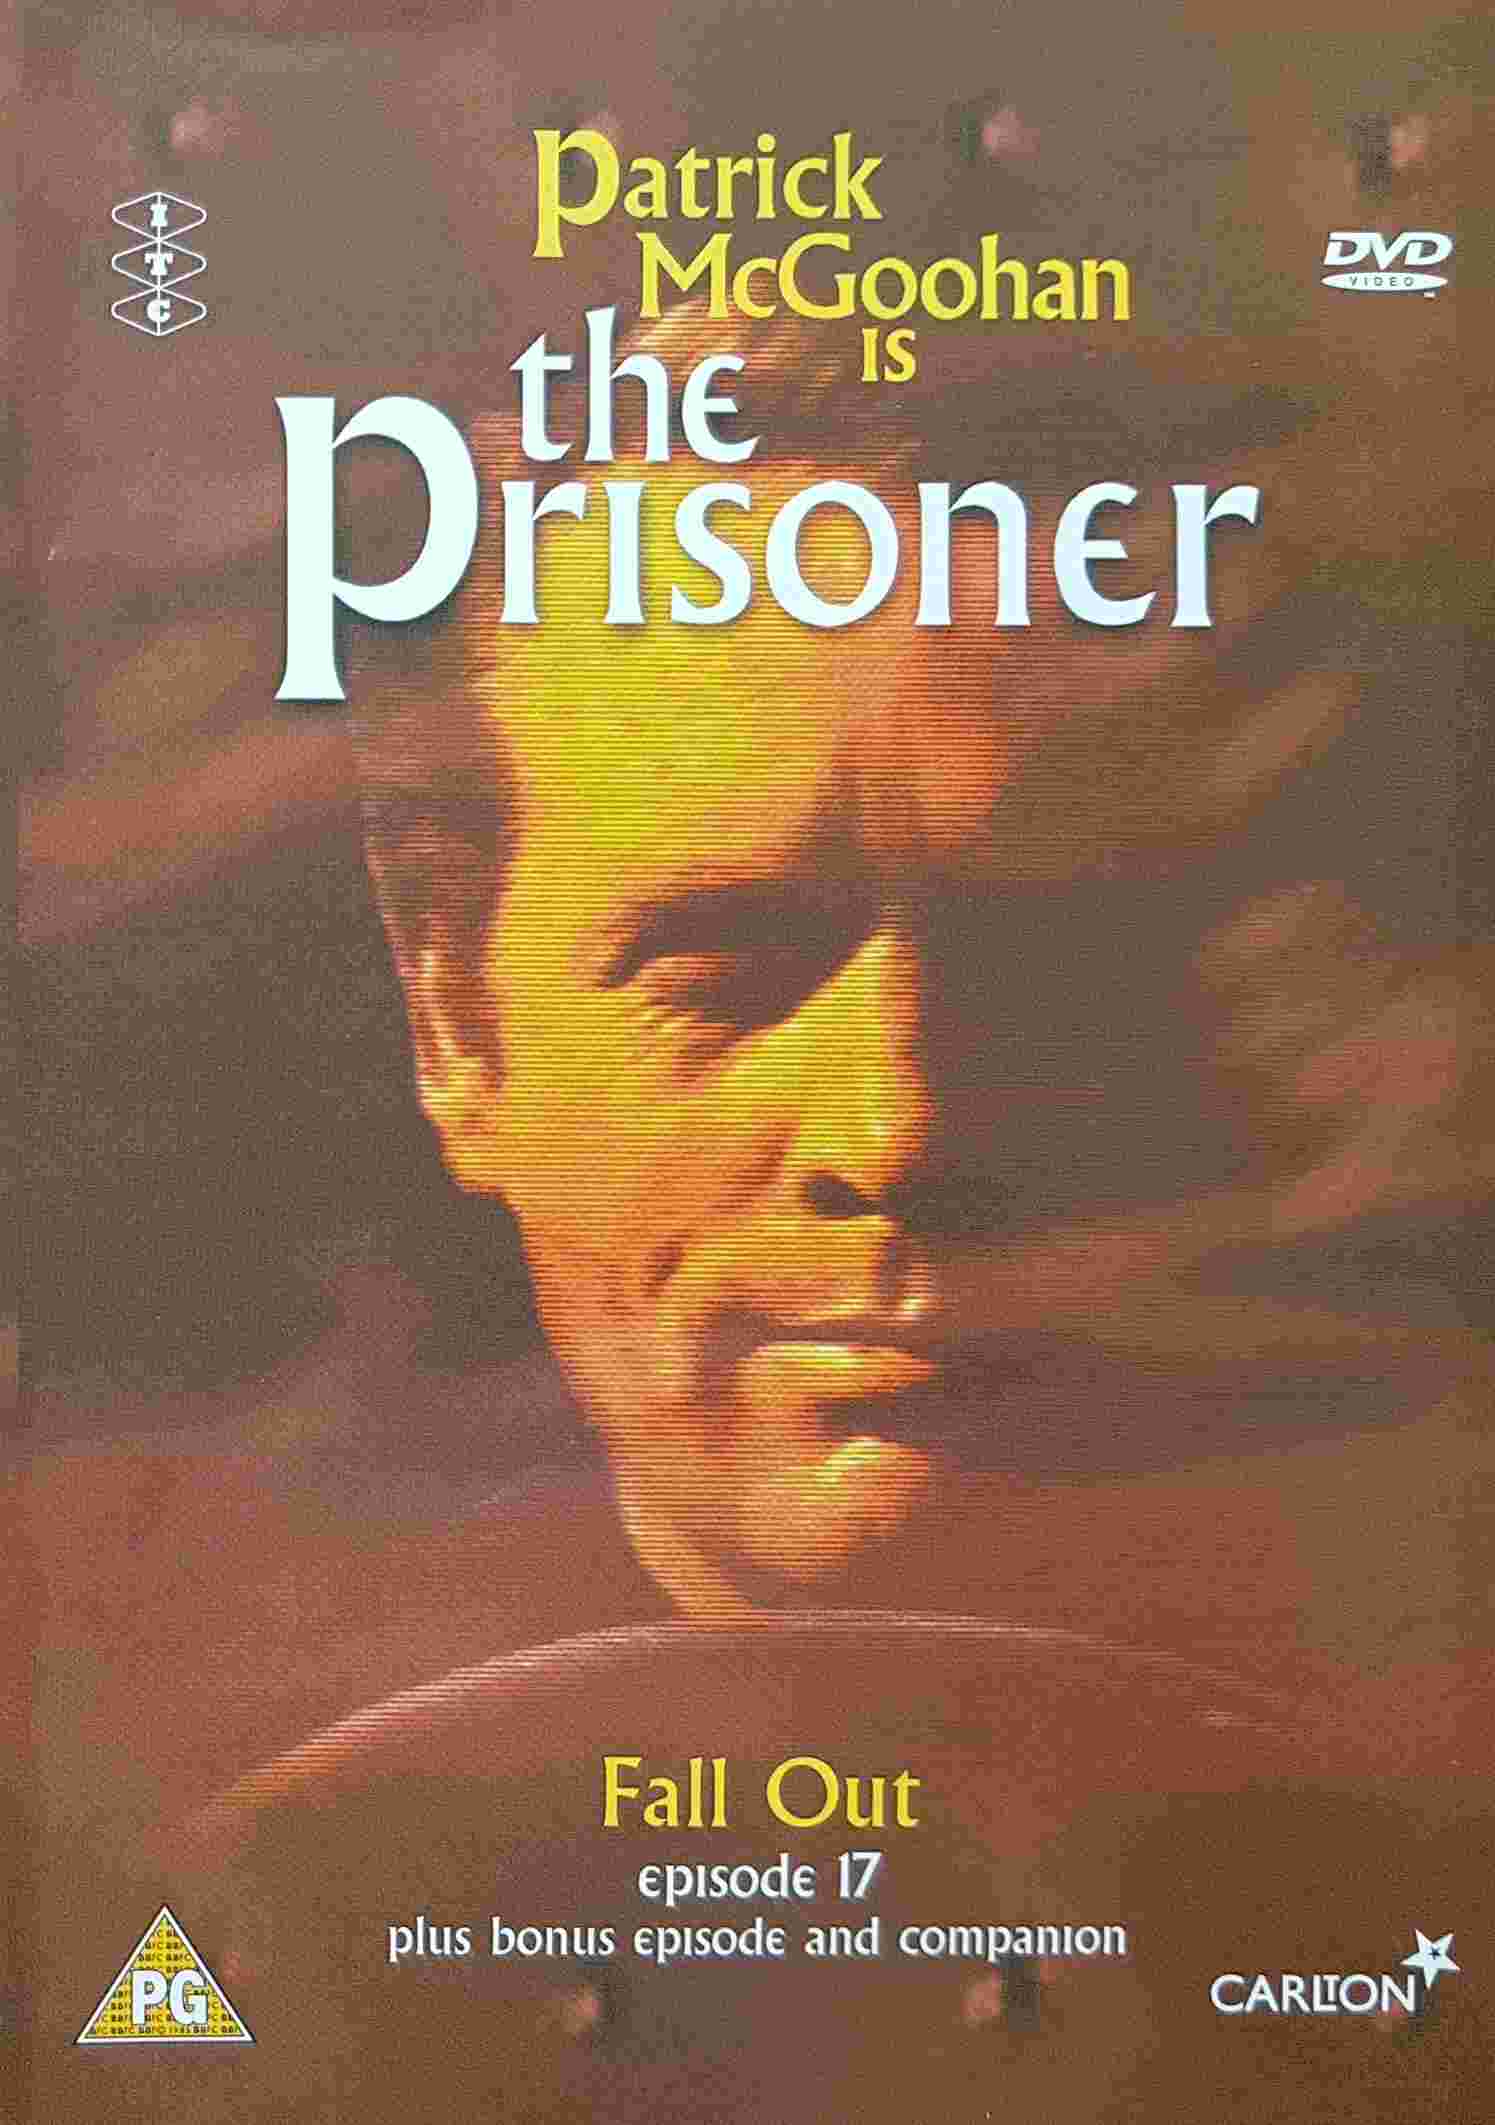 Picture of The prisoner - Episode 17, Alternative chimes, Prisoner companion by artist Various from ITV, Channel 4 and Channel 5 dvds library